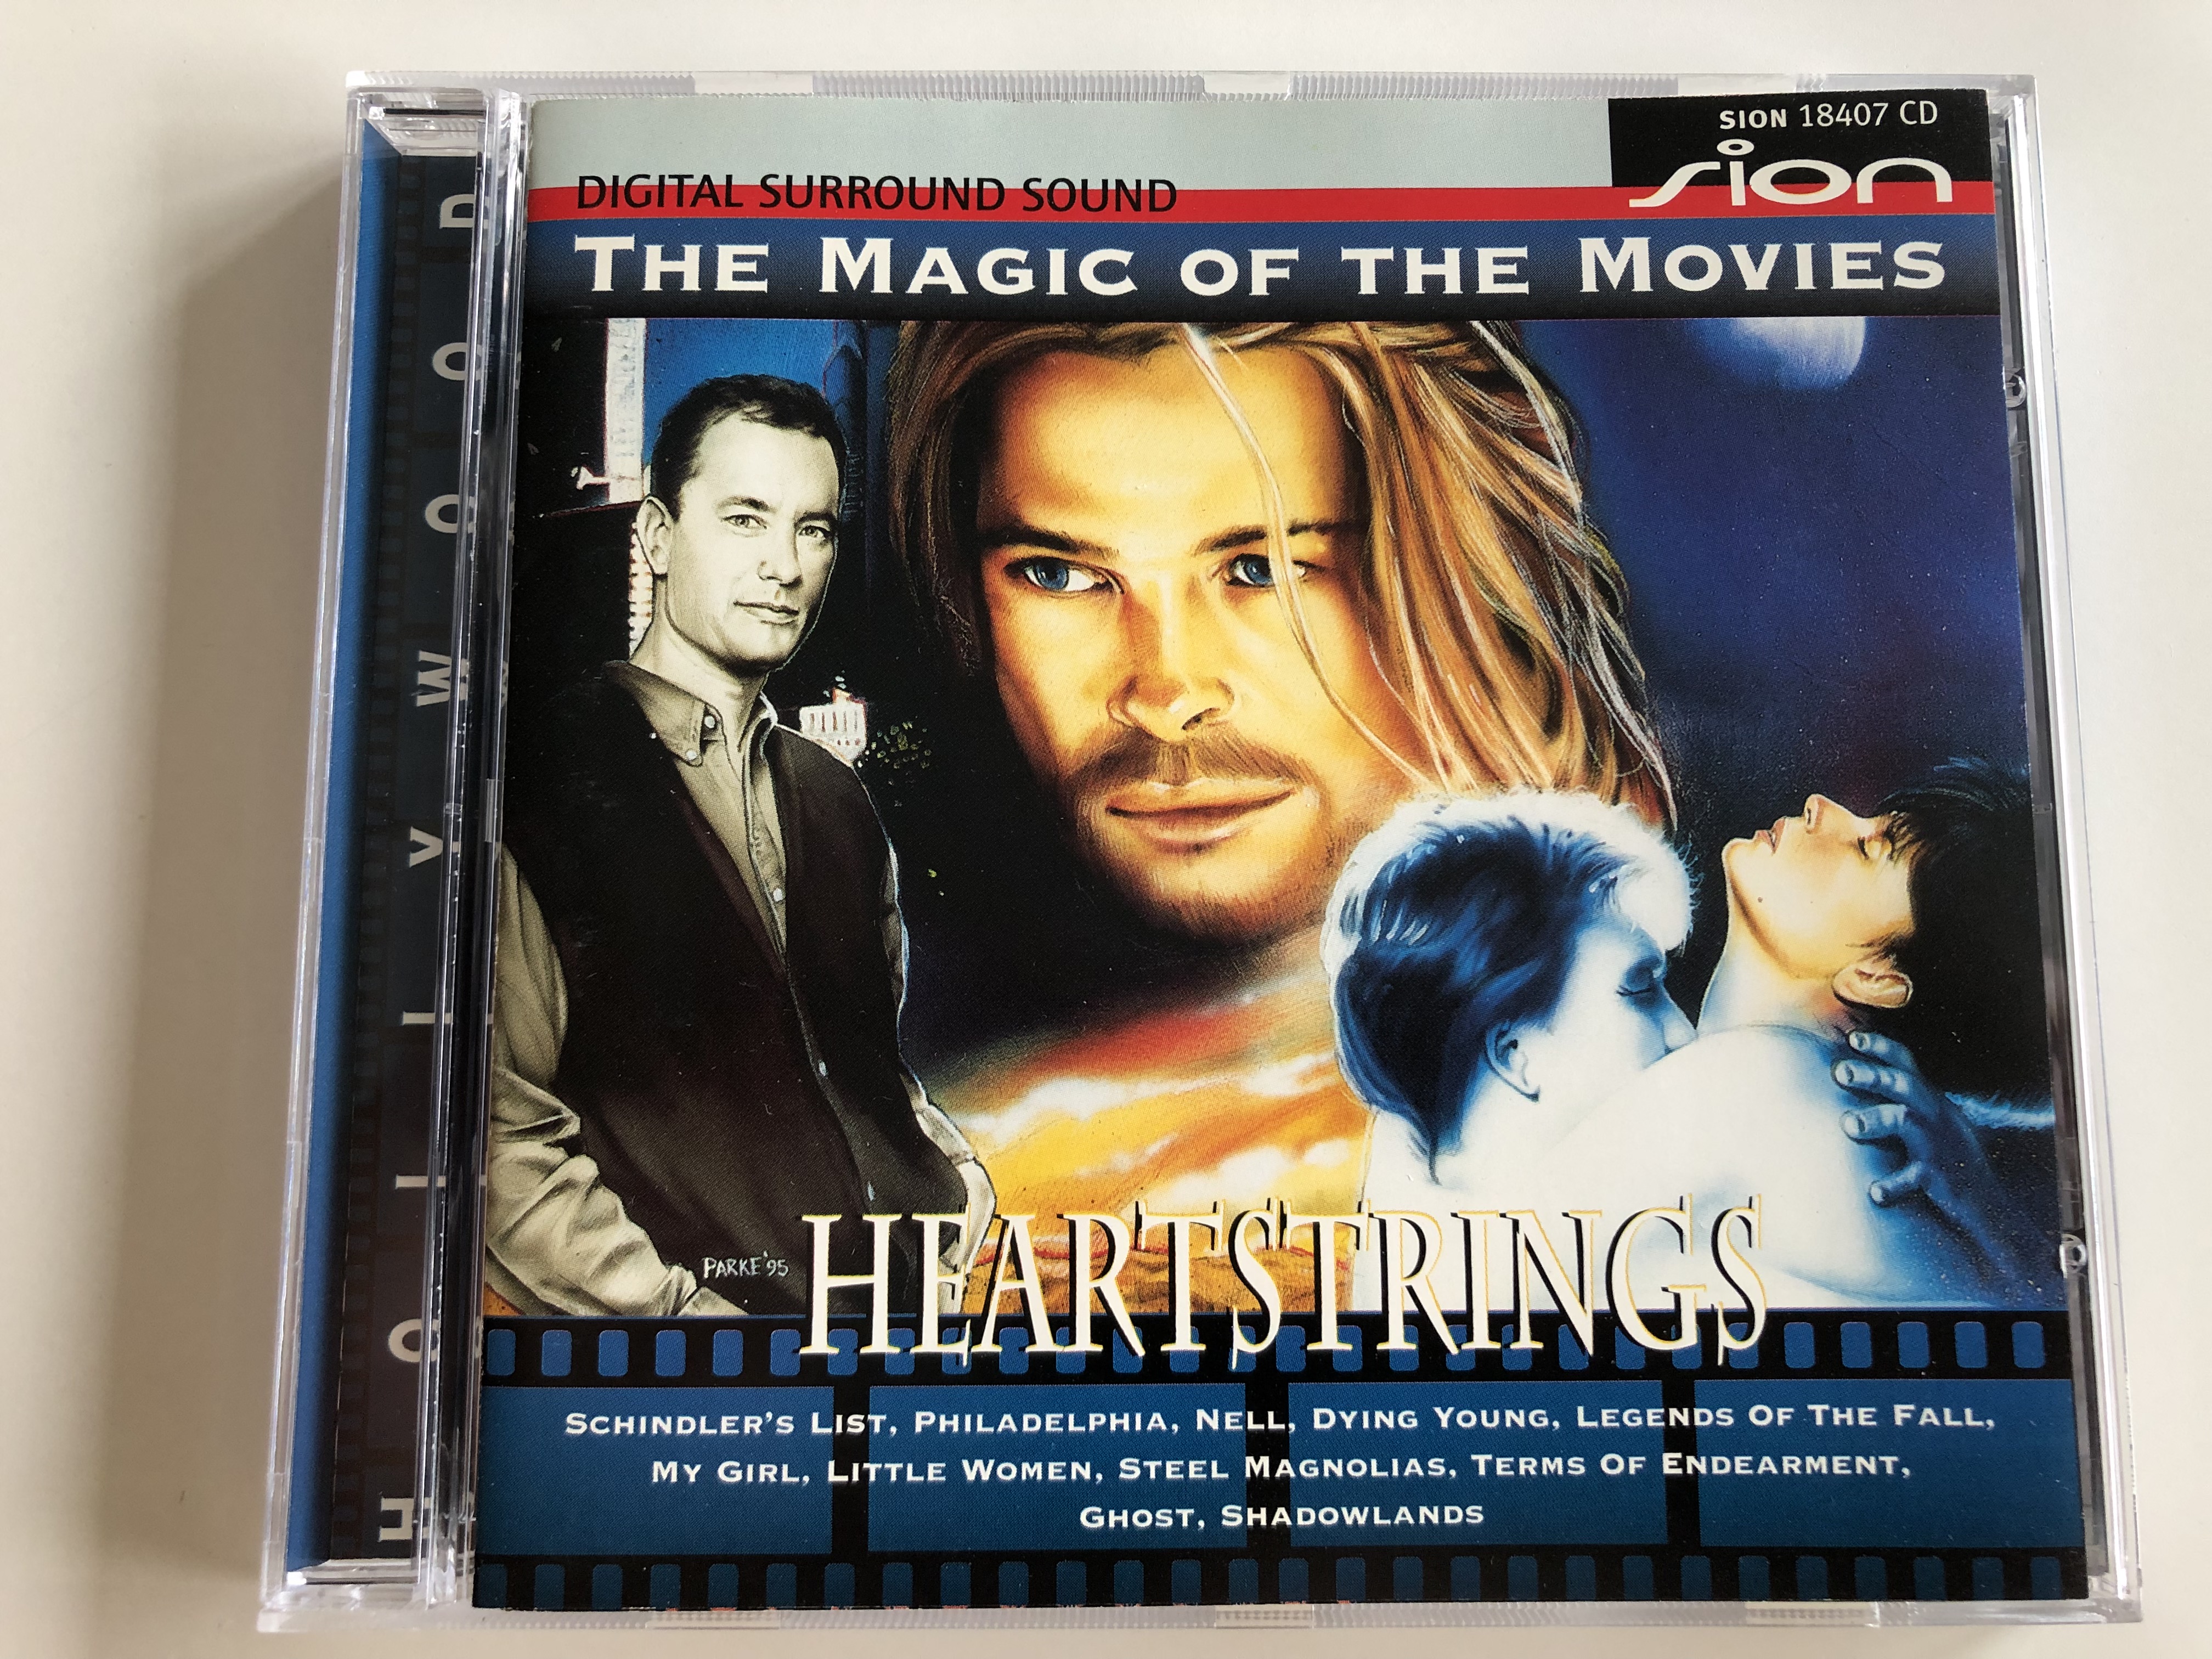 the-magic-of-the-movies-heartstrings-schindler-s-list-philadelphia-nell-dying-young-legends-of-the-fall-ghost-shadowlands-sion-18407-cd-digital-surround-sound-audio-cd-1997-1-.jpg